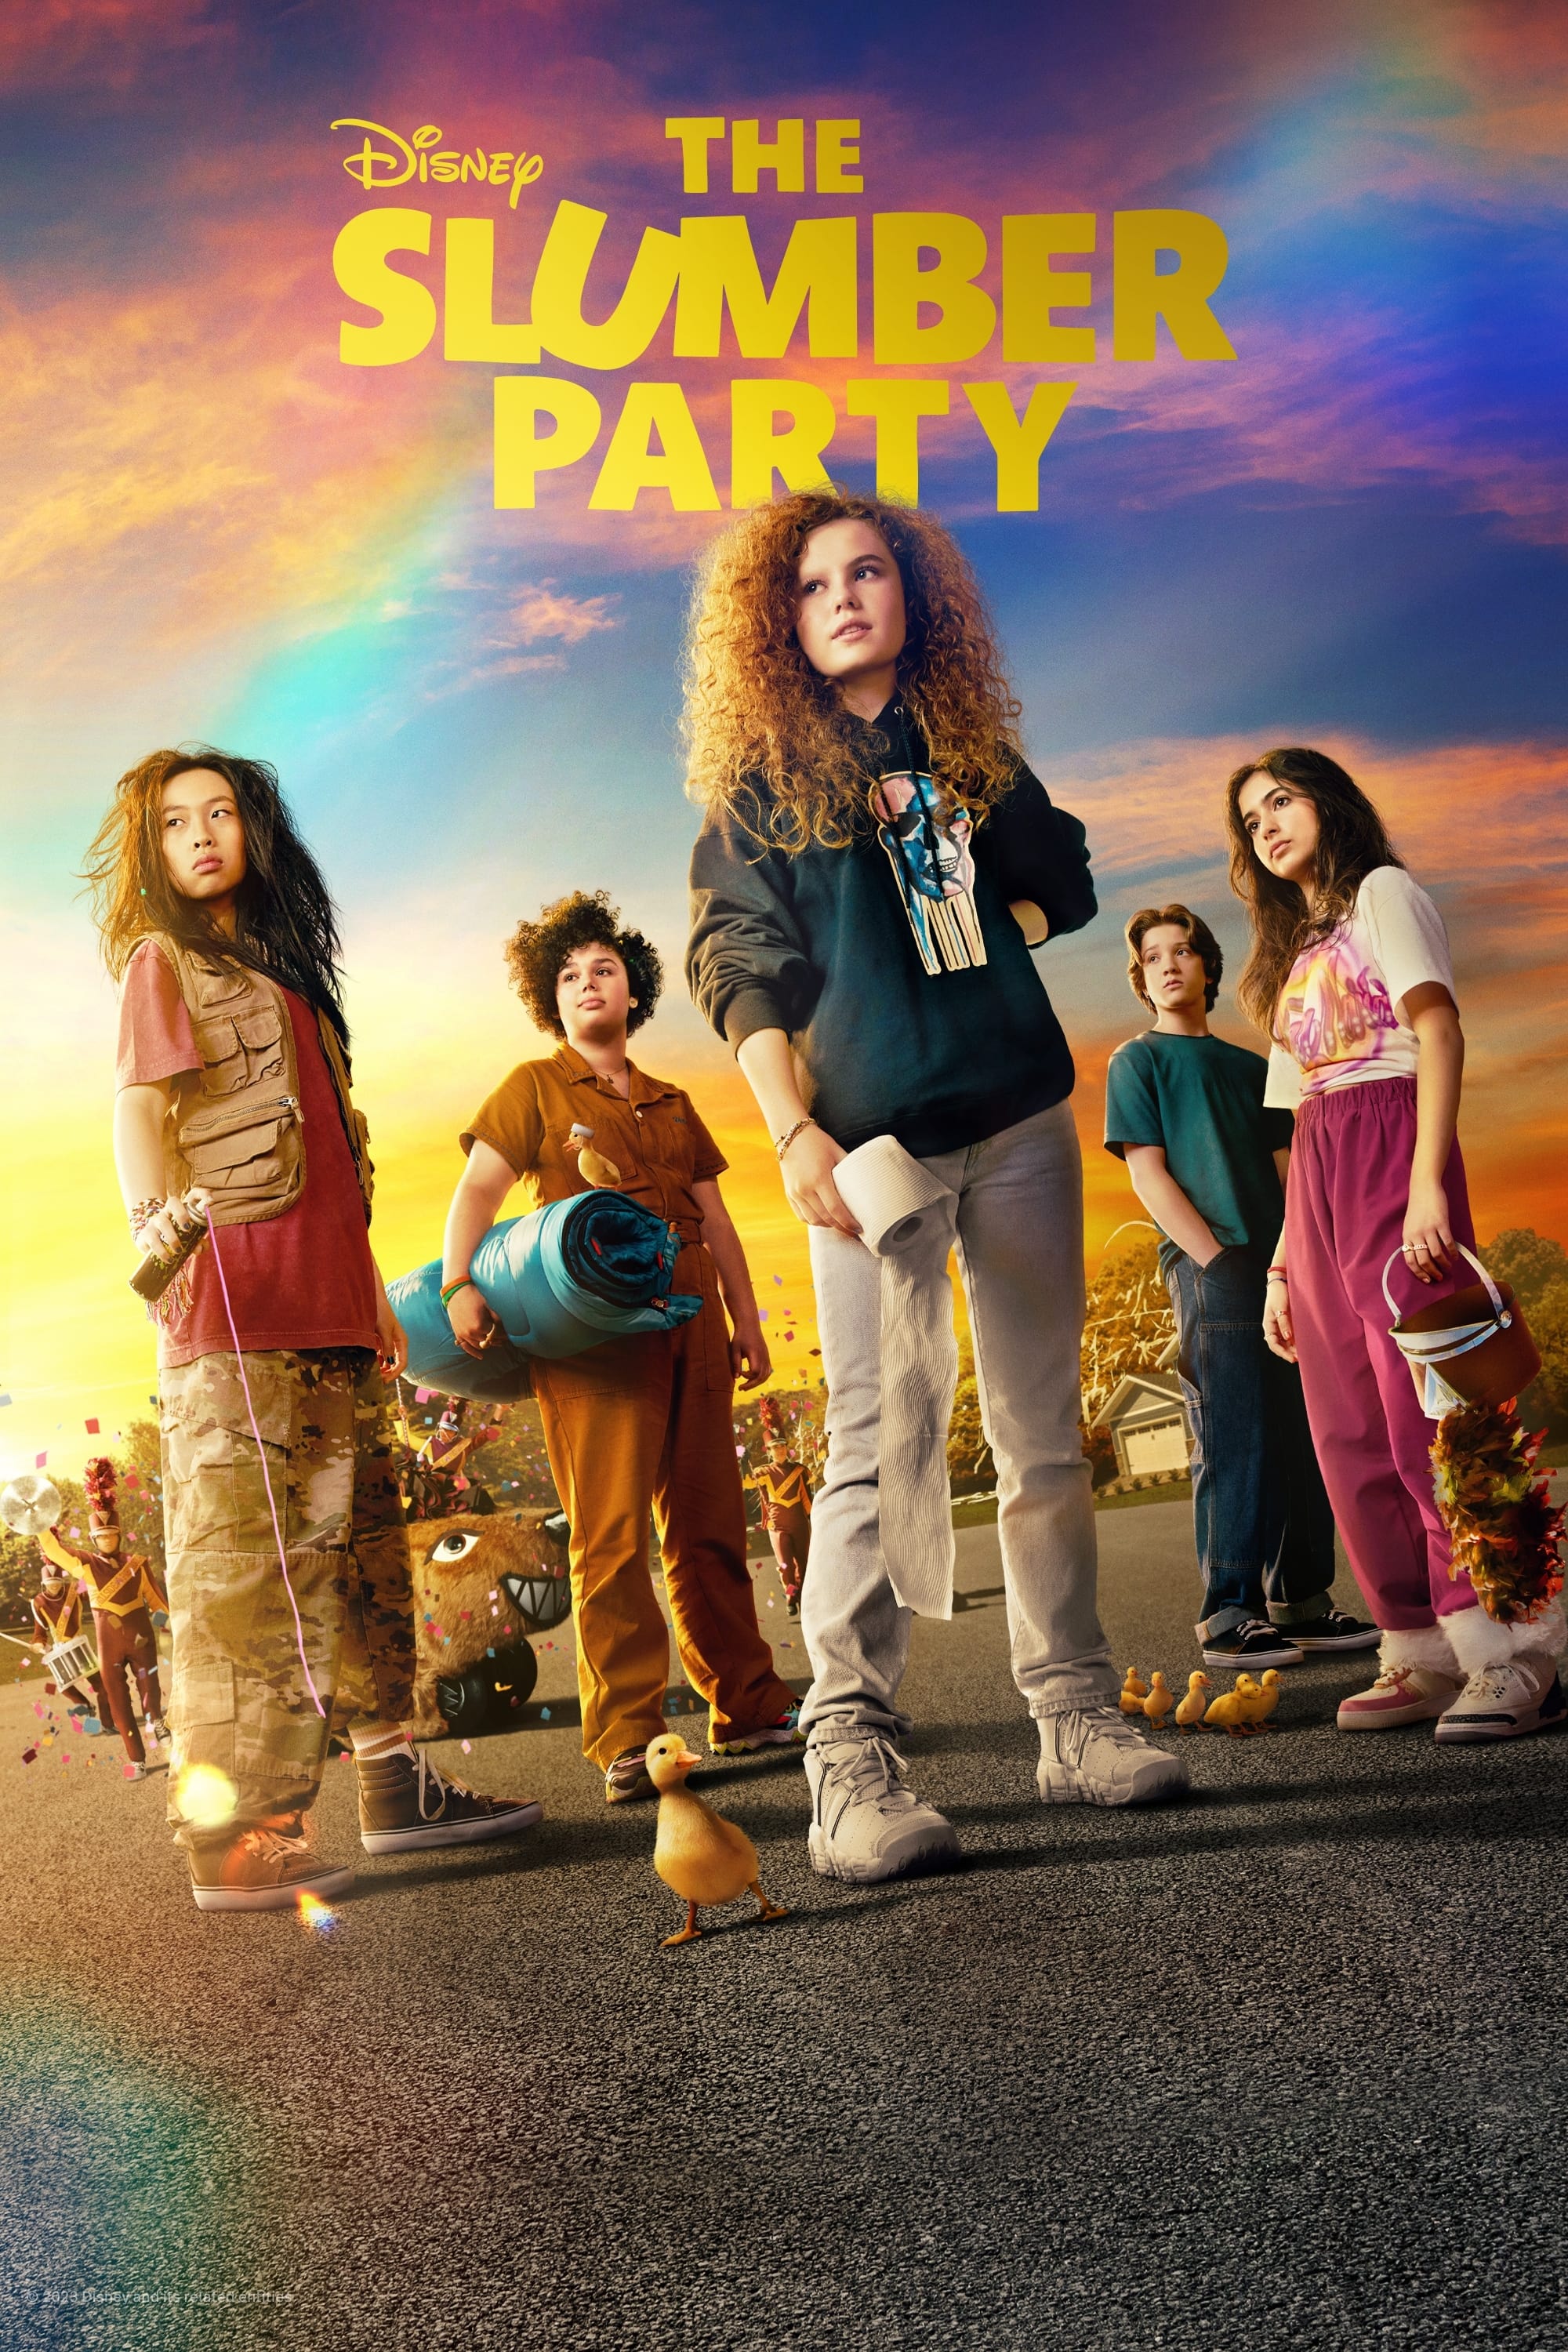 [WATCH 71+] The Slumber Party (2023) FULL MOVIE ONLINE FREE ENGLISH/Dub/SUB Comedy STREAMINGS ������ Movie Poster